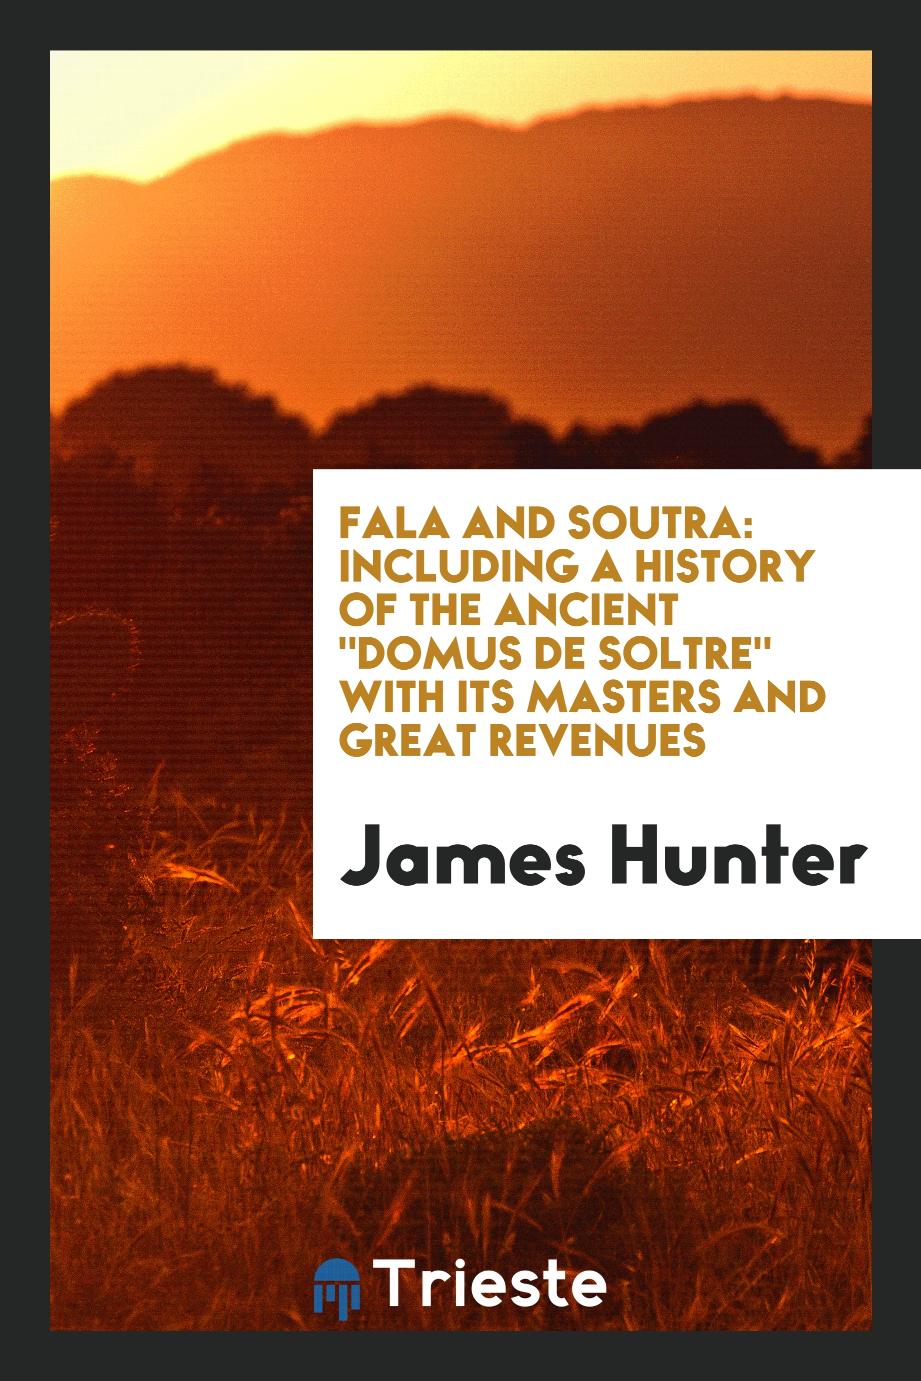 Fala and Soutra: Including a History of the Ancient "Domus De Soltre" with Its Masters and Great Revenues